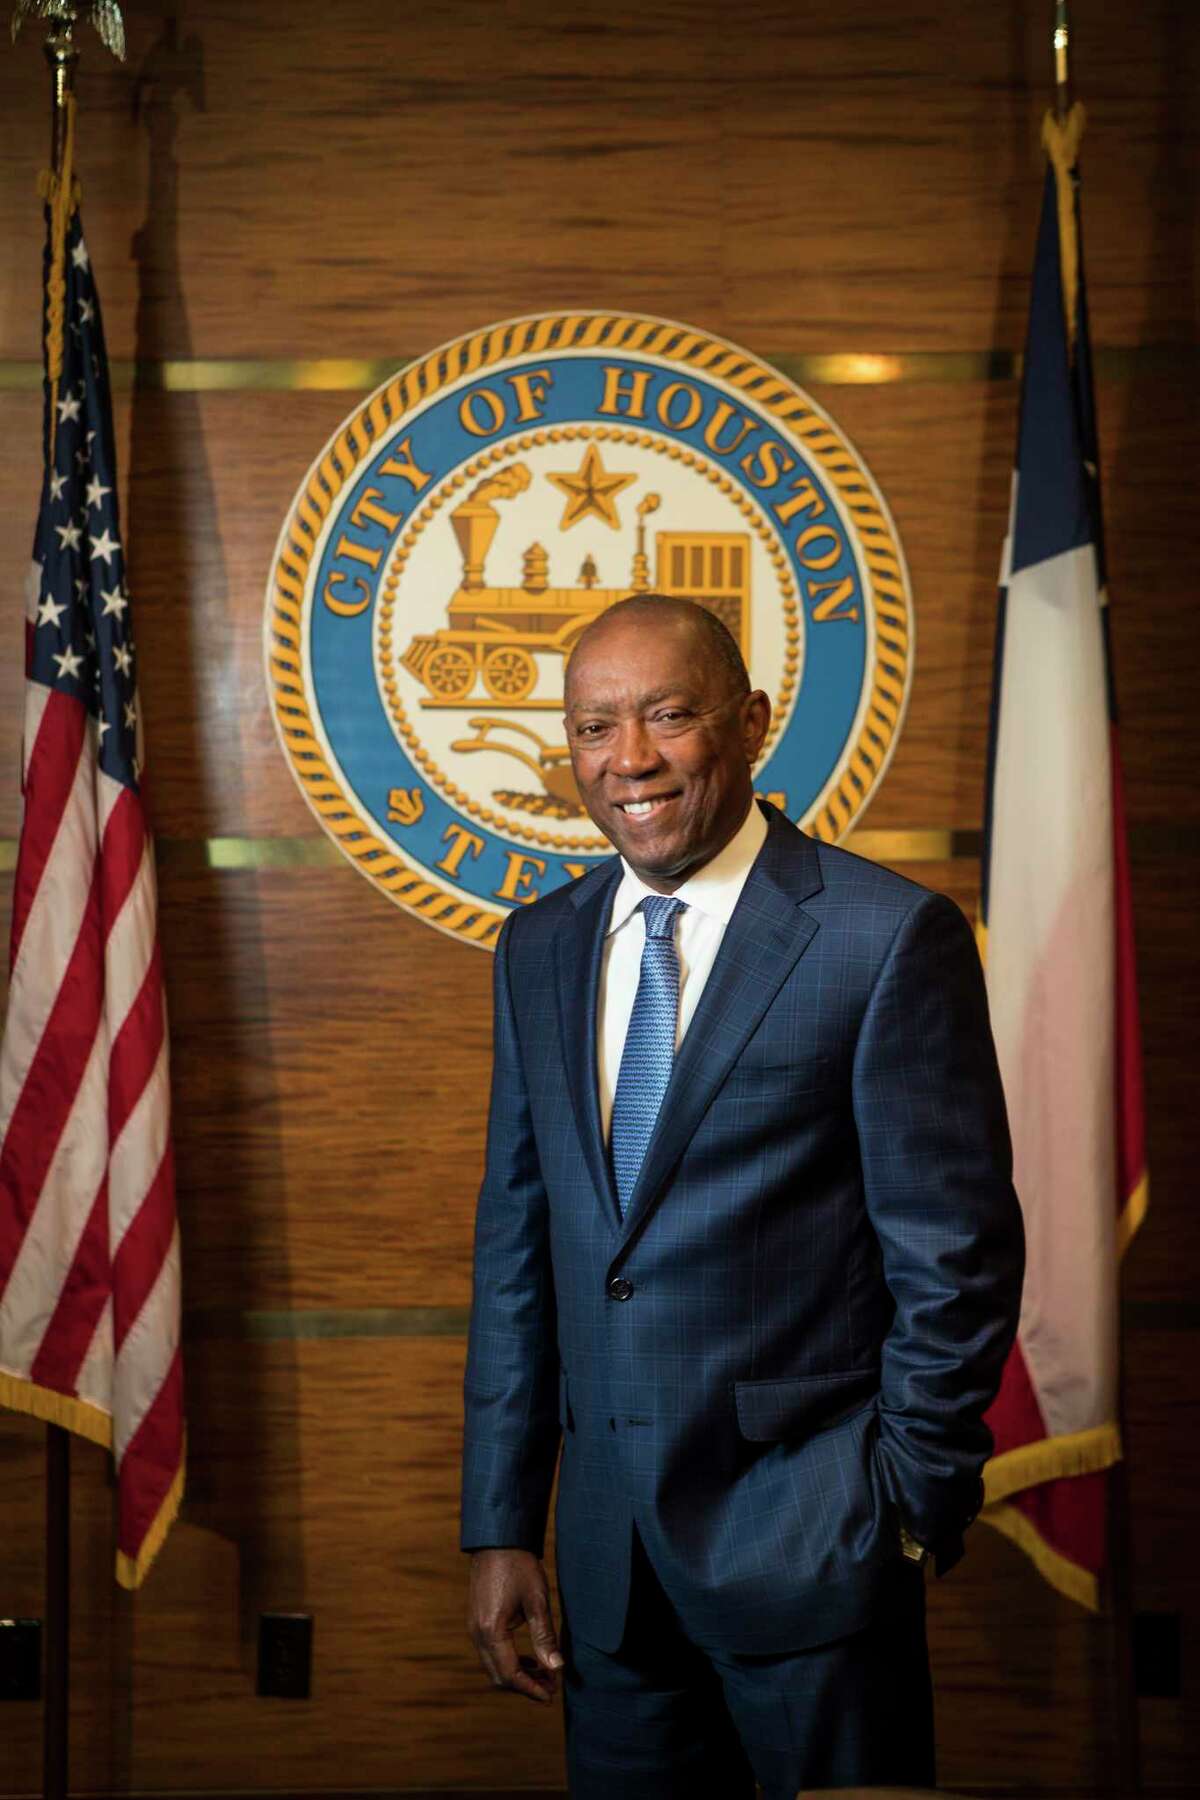 Mayor Sylvester Turner stands in the proclamation room at City Hall on Wednesday, May 29, 2019, in Houston.